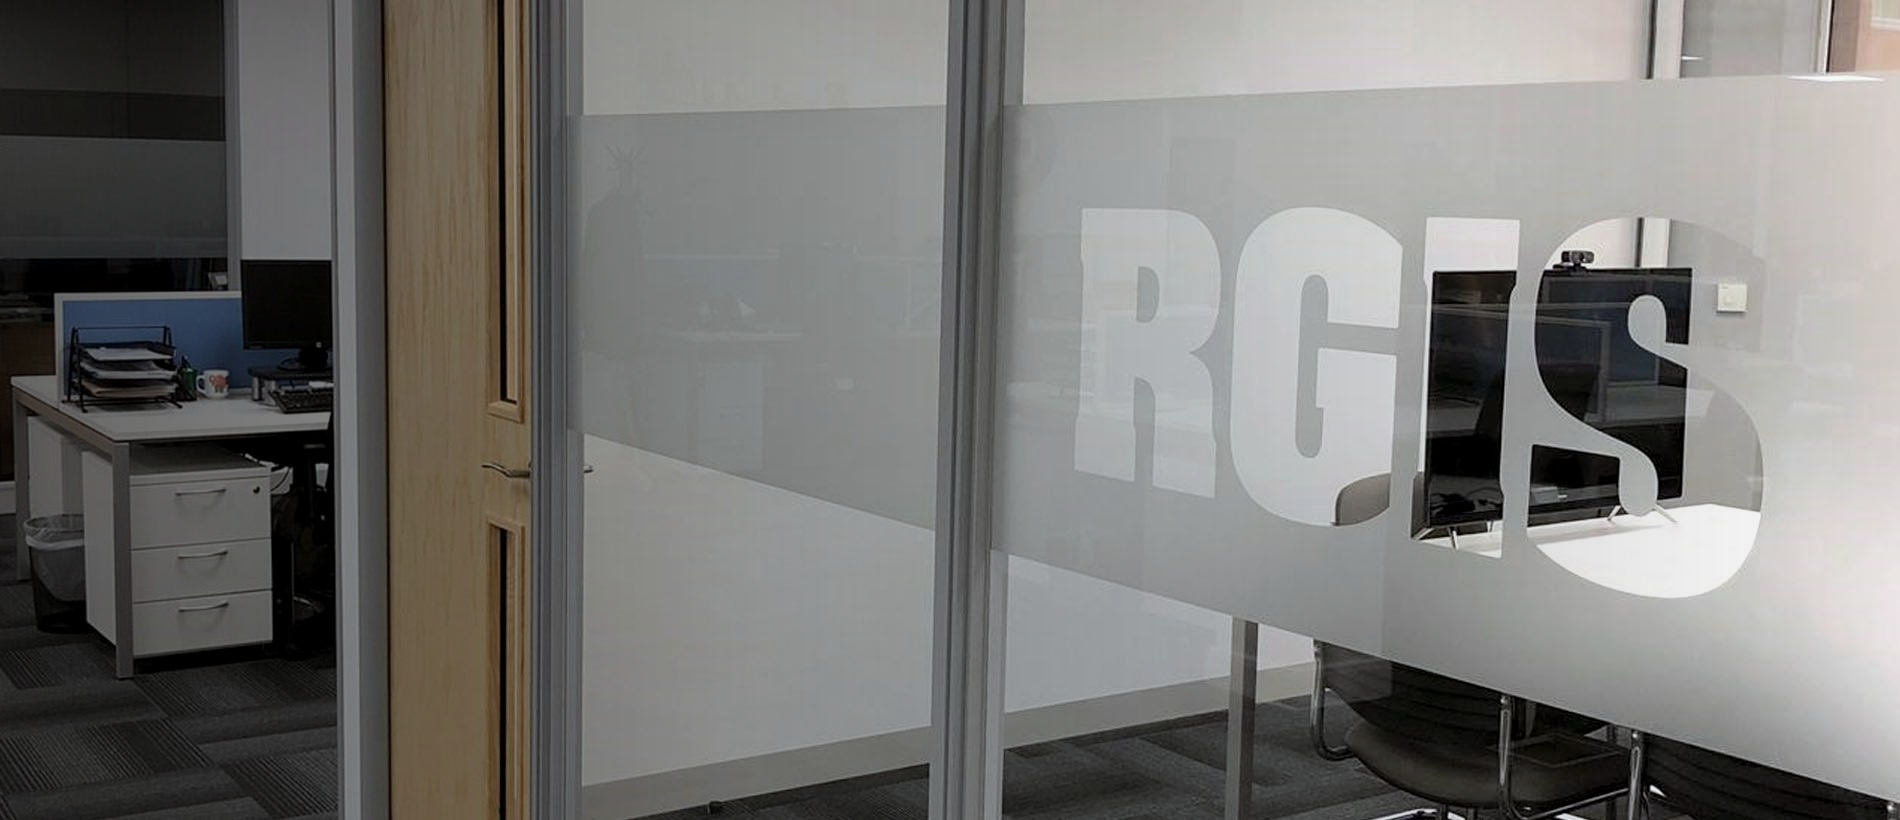 RGIS offices around the world